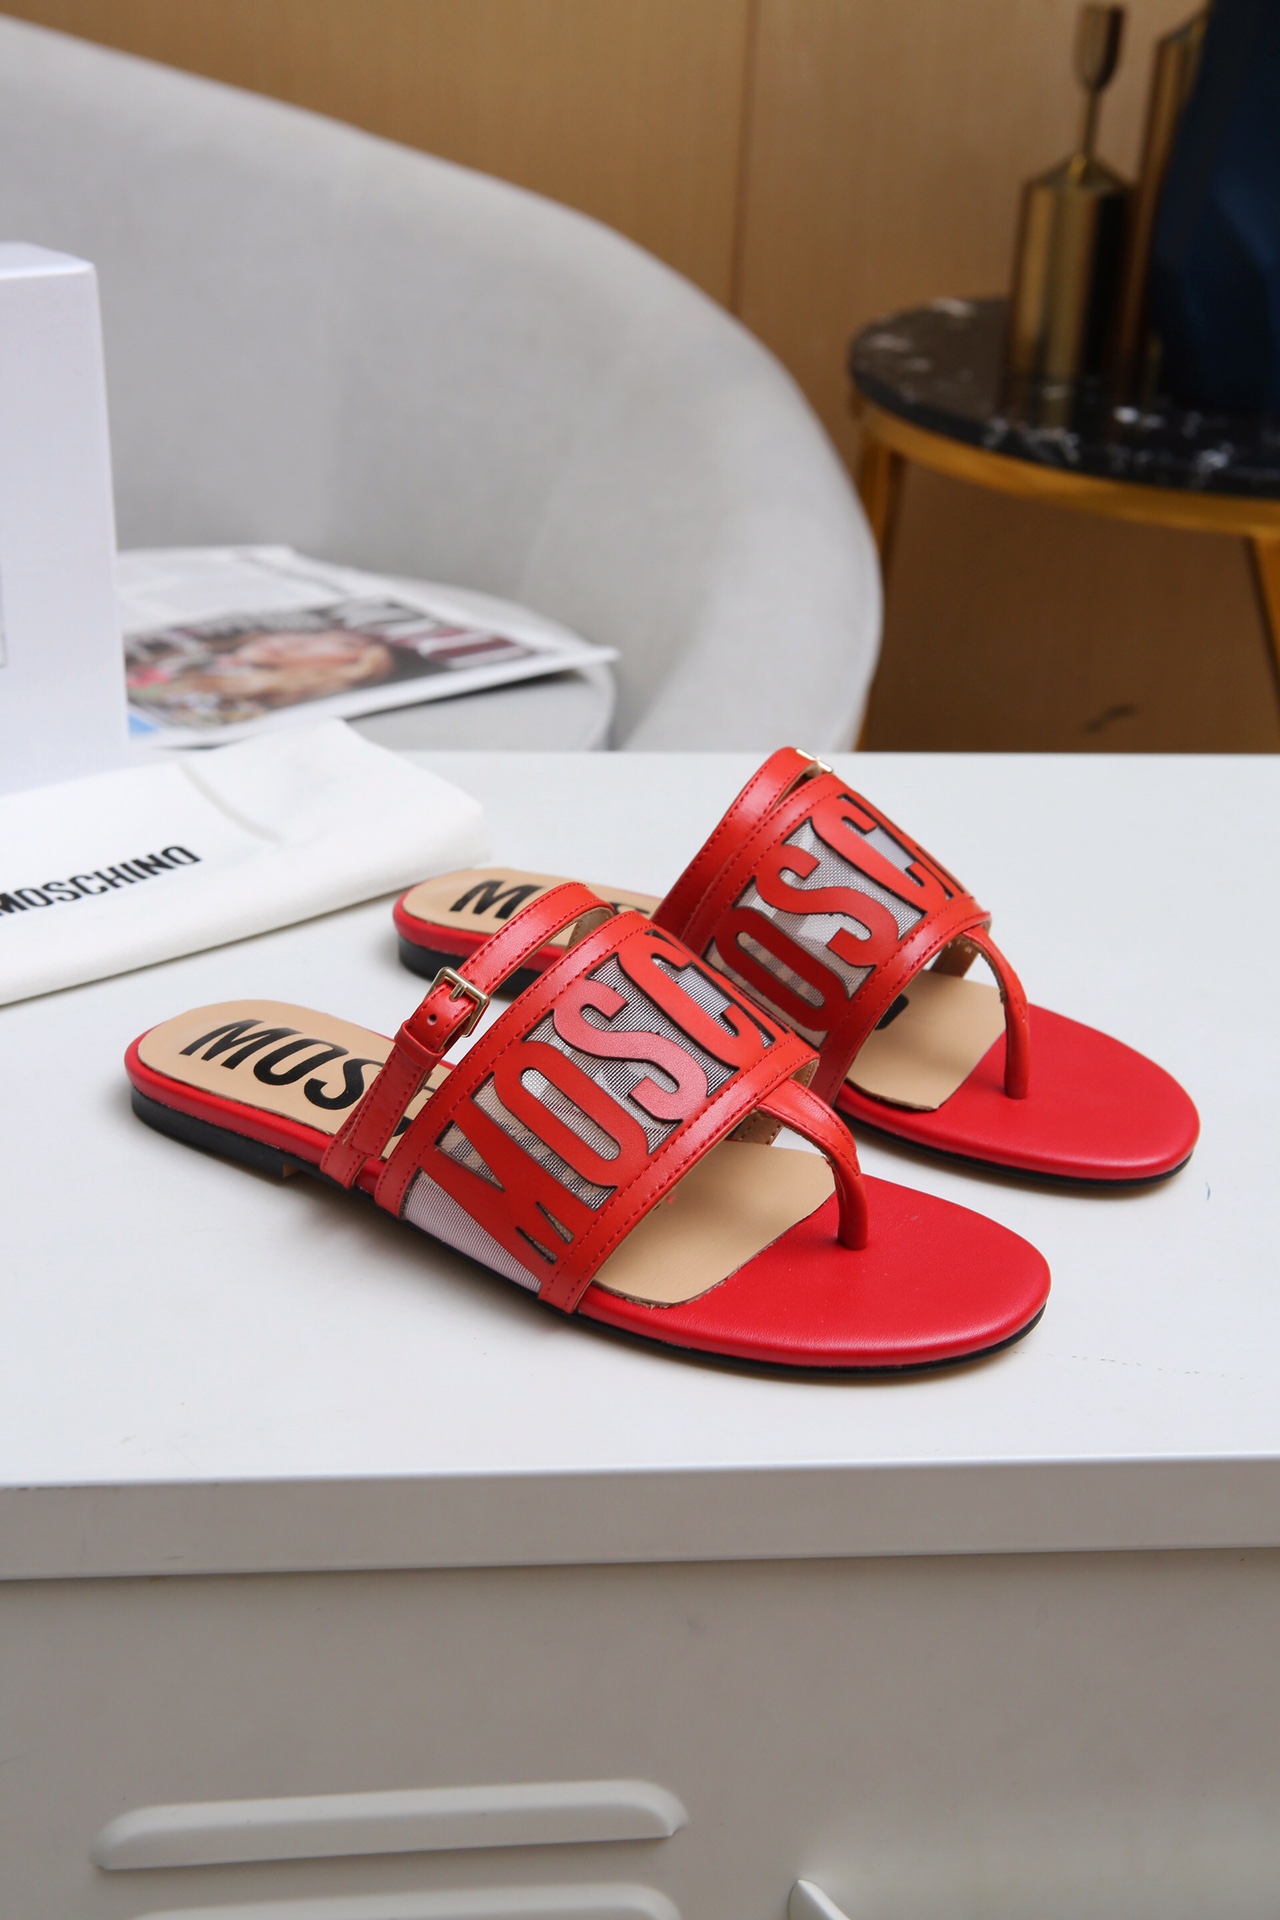 Moschino Slide Sandals For Women # 250988, cheap Moschino Sandals, only $69!